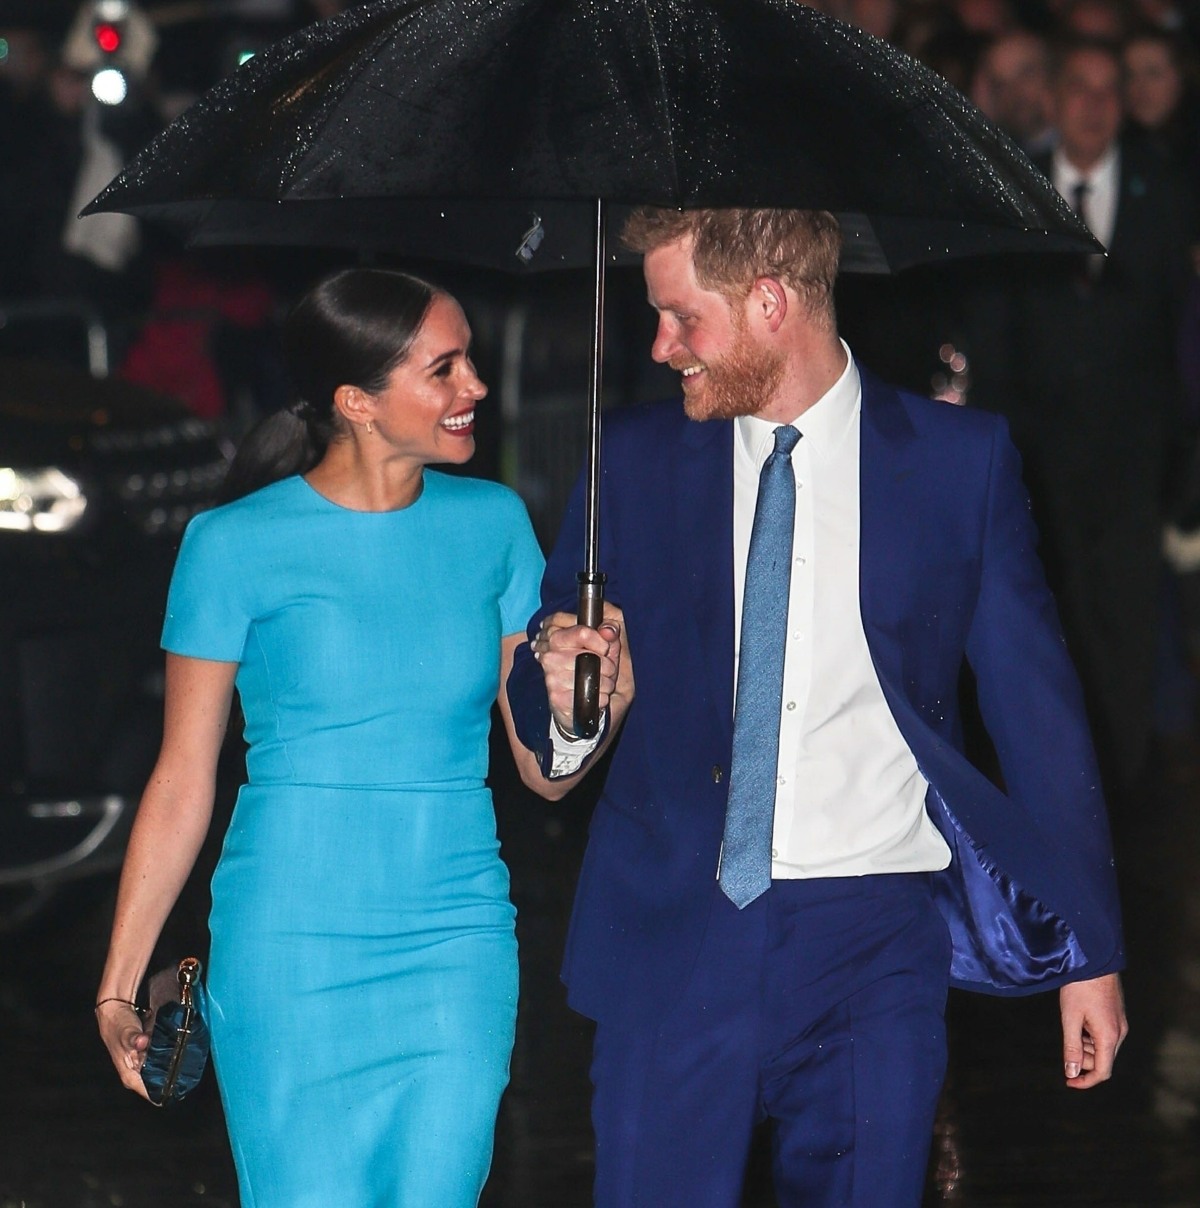 Prince Harry and Meghan Markle attend The Endeavour Fund Awards at Mansion House